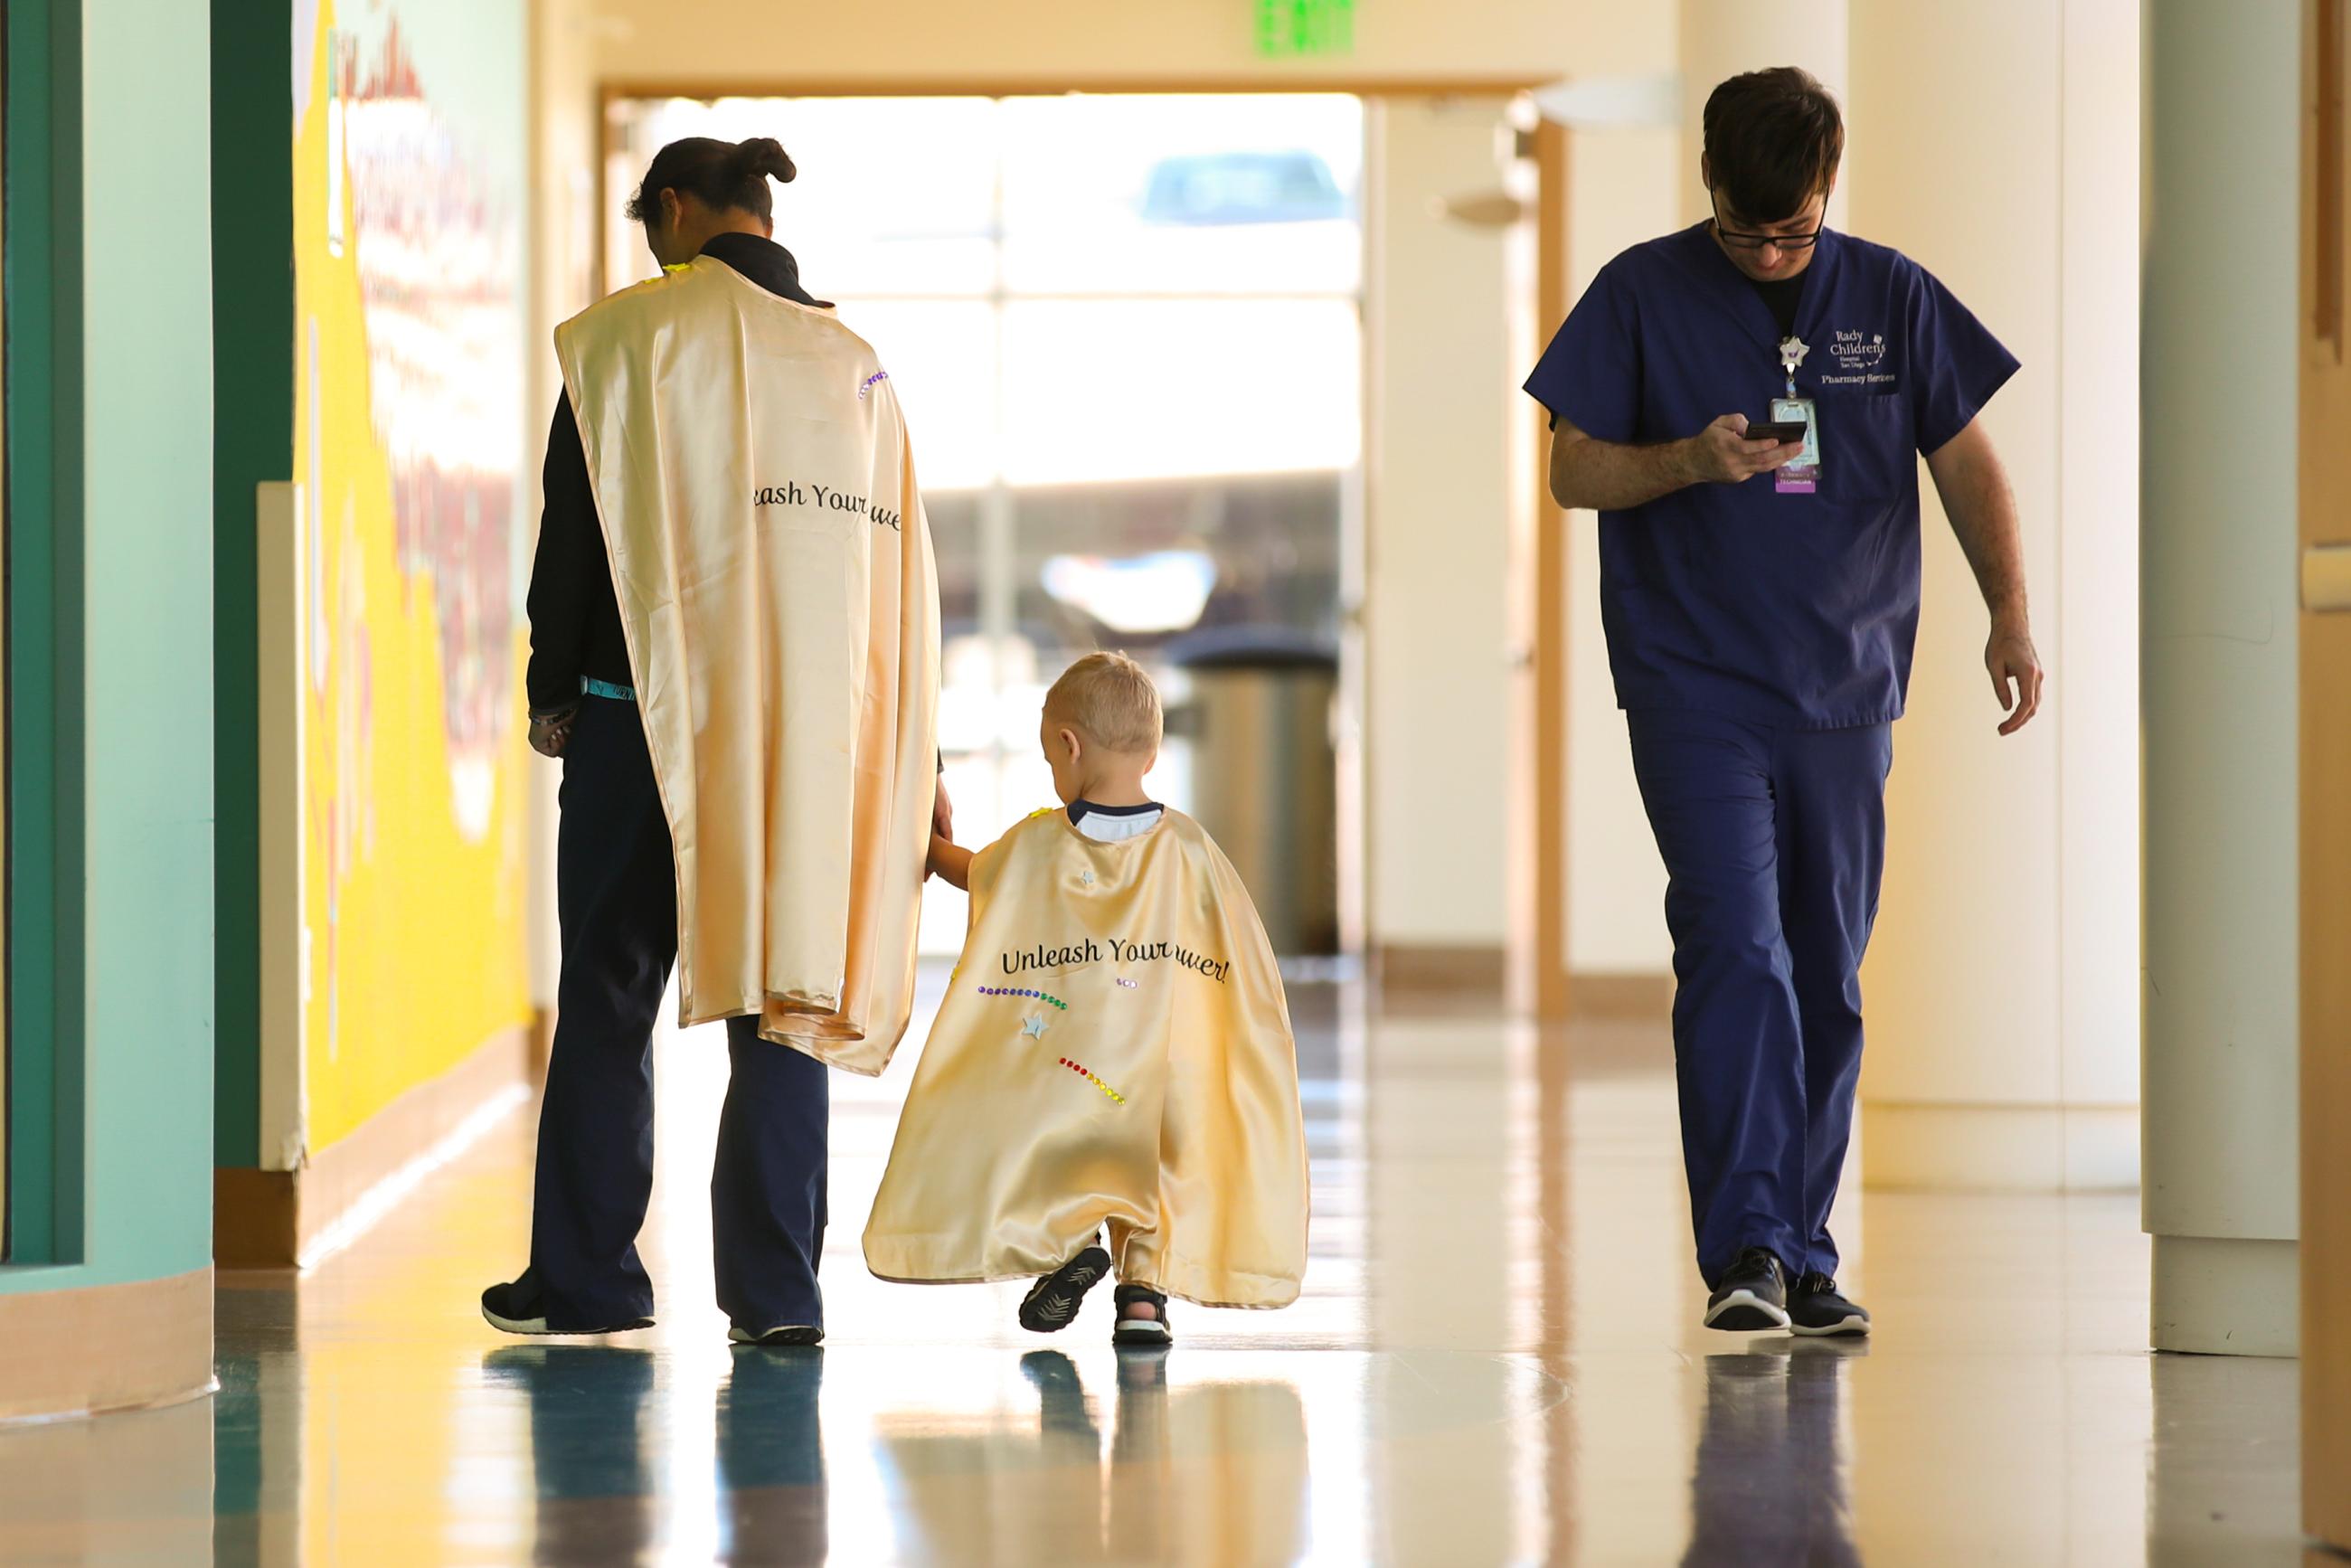 Two-year-old cancer patient Jimmy walks with his nurse back to his room at Rady's Children Hospital after participating in decorating golden capes that say "Unleash Your Power" to wear as superheroes as part of Childhood Cancer Month in San Diego, California, on September 4, 2019.